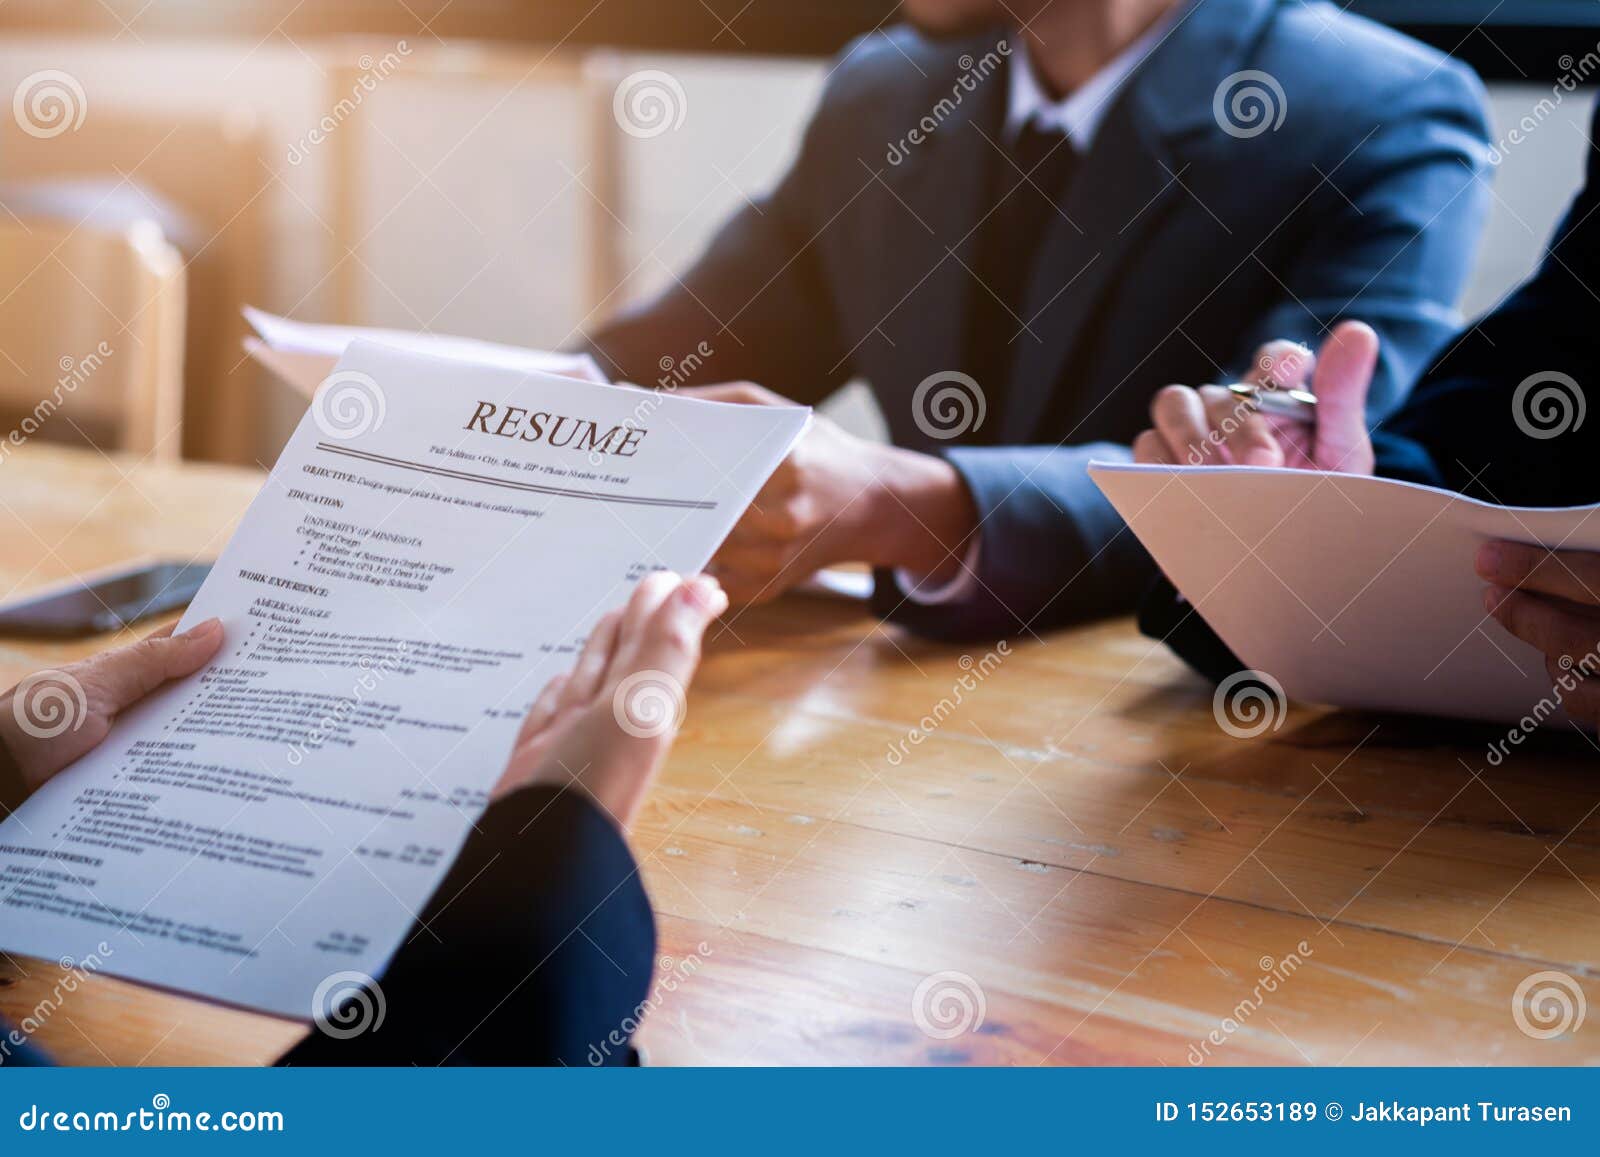 interviewer reading a resume, person submits job application, person describe yourself to interviewer, close up view of job